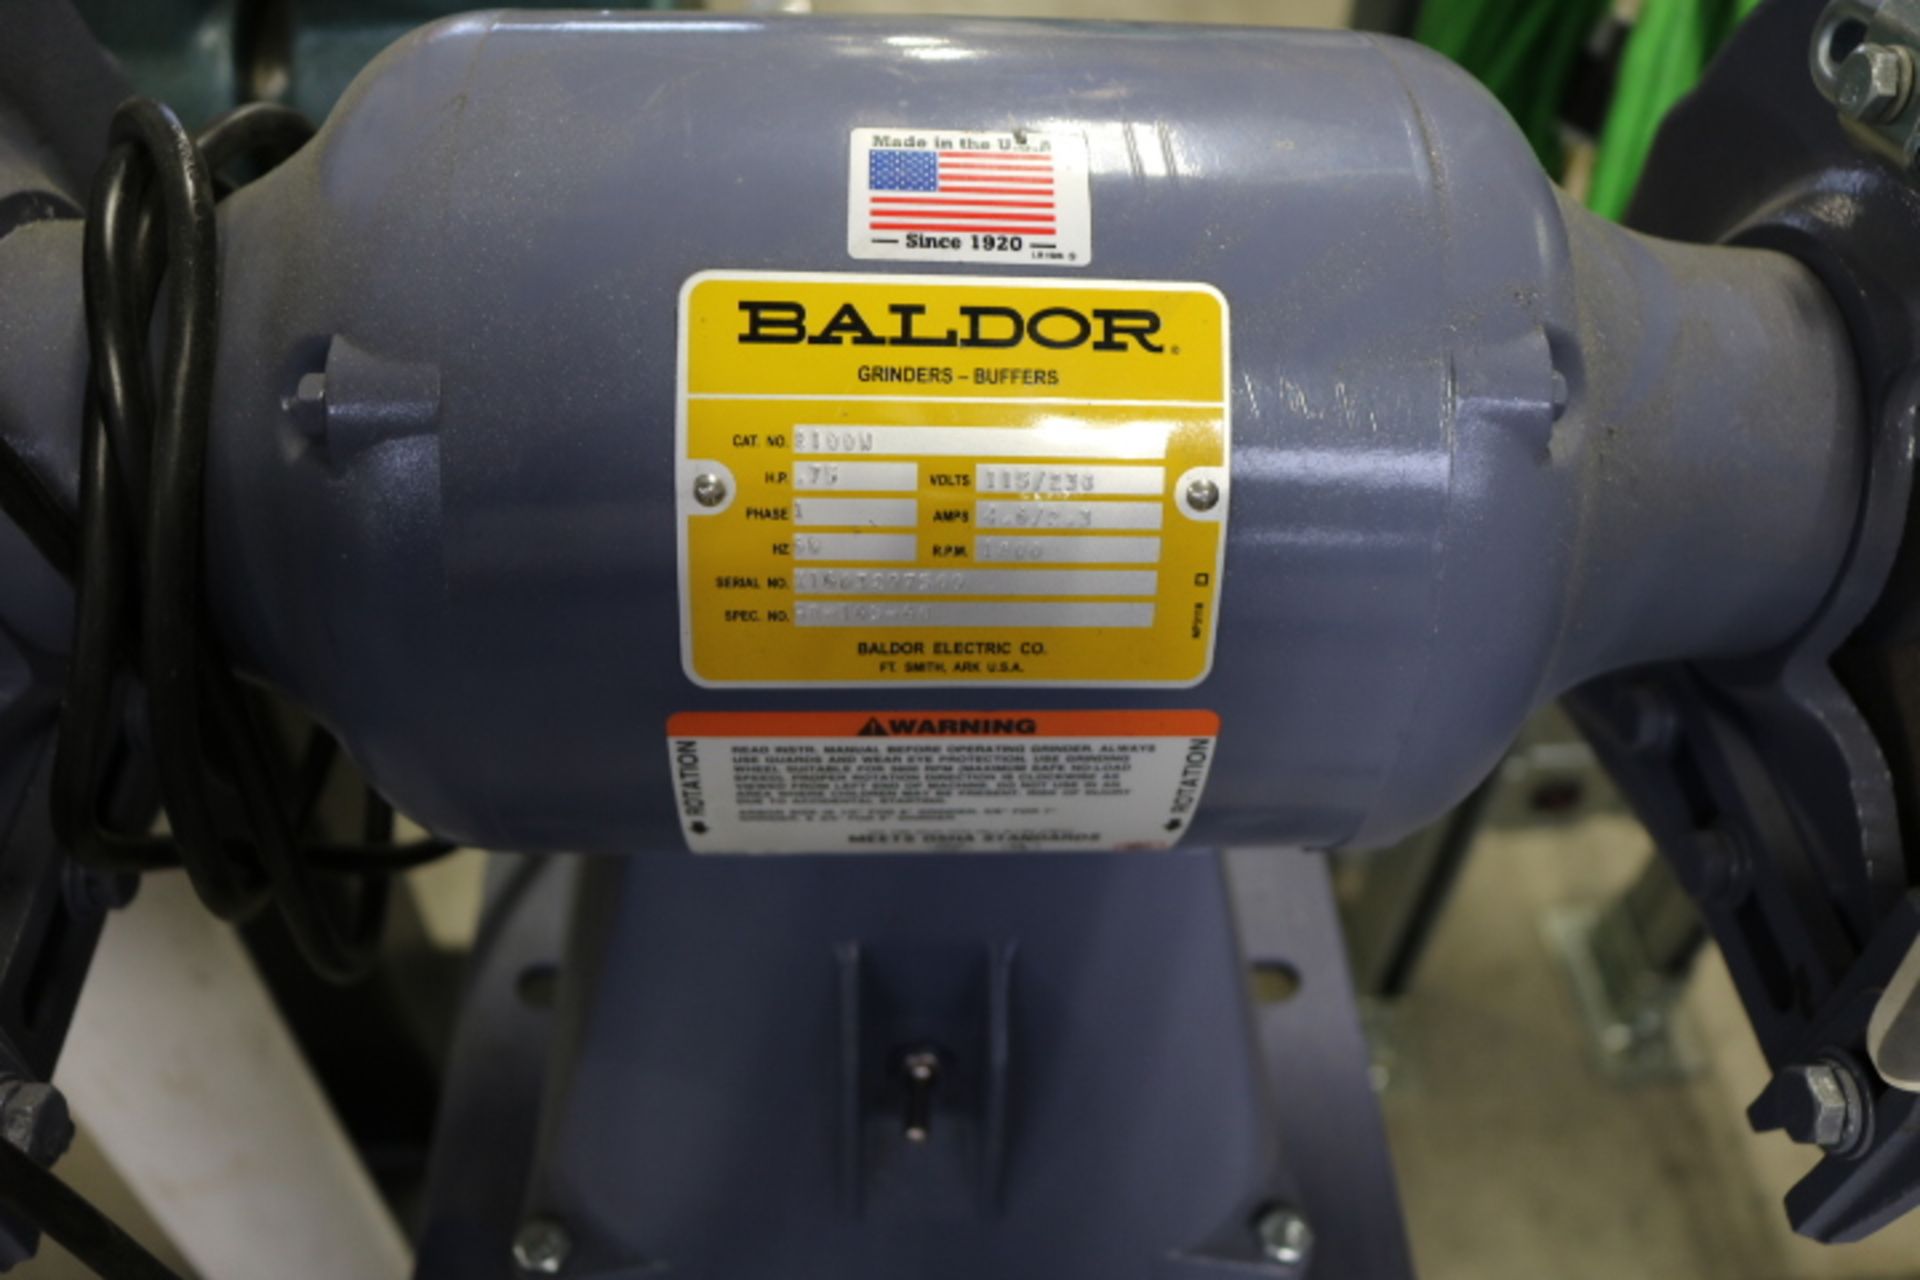 BALDOR DOUBLE END GRINDER, 8", W/ GUARDS, PEDESTAL STAND AND COOLING TRAY - Image 2 of 2